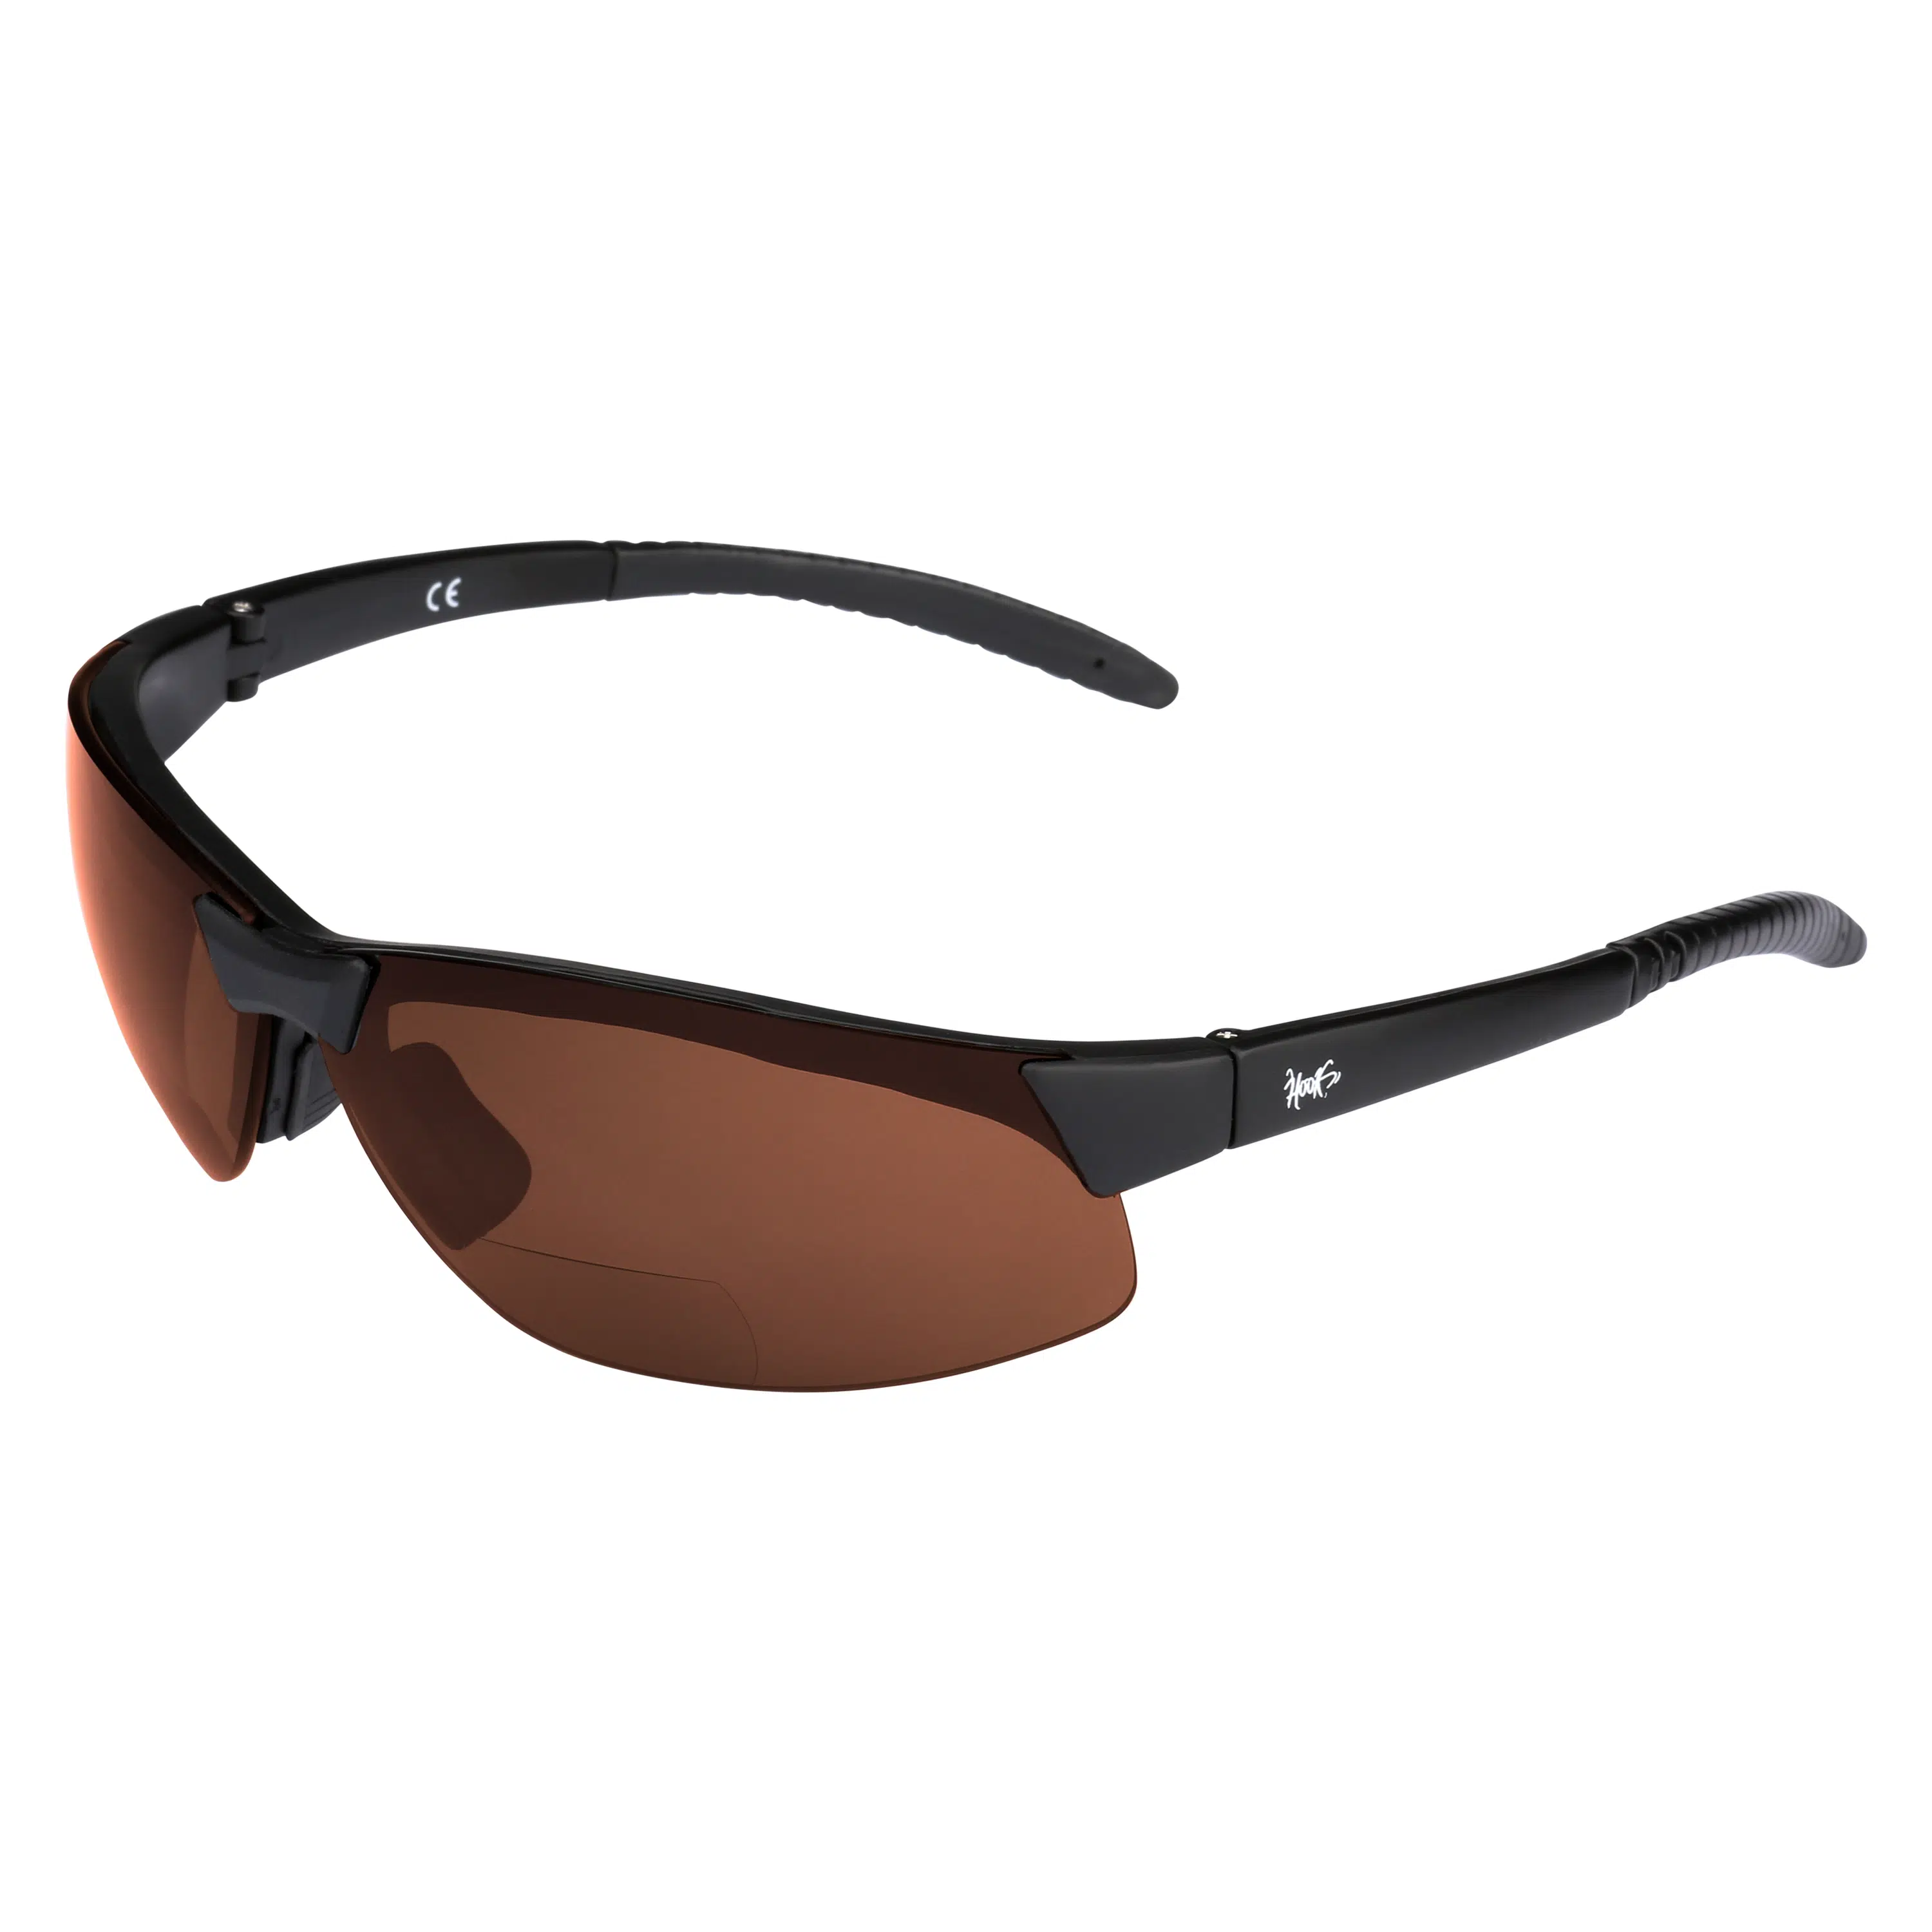 Which one is better, polarised or UV protection sunglasses? - Quora